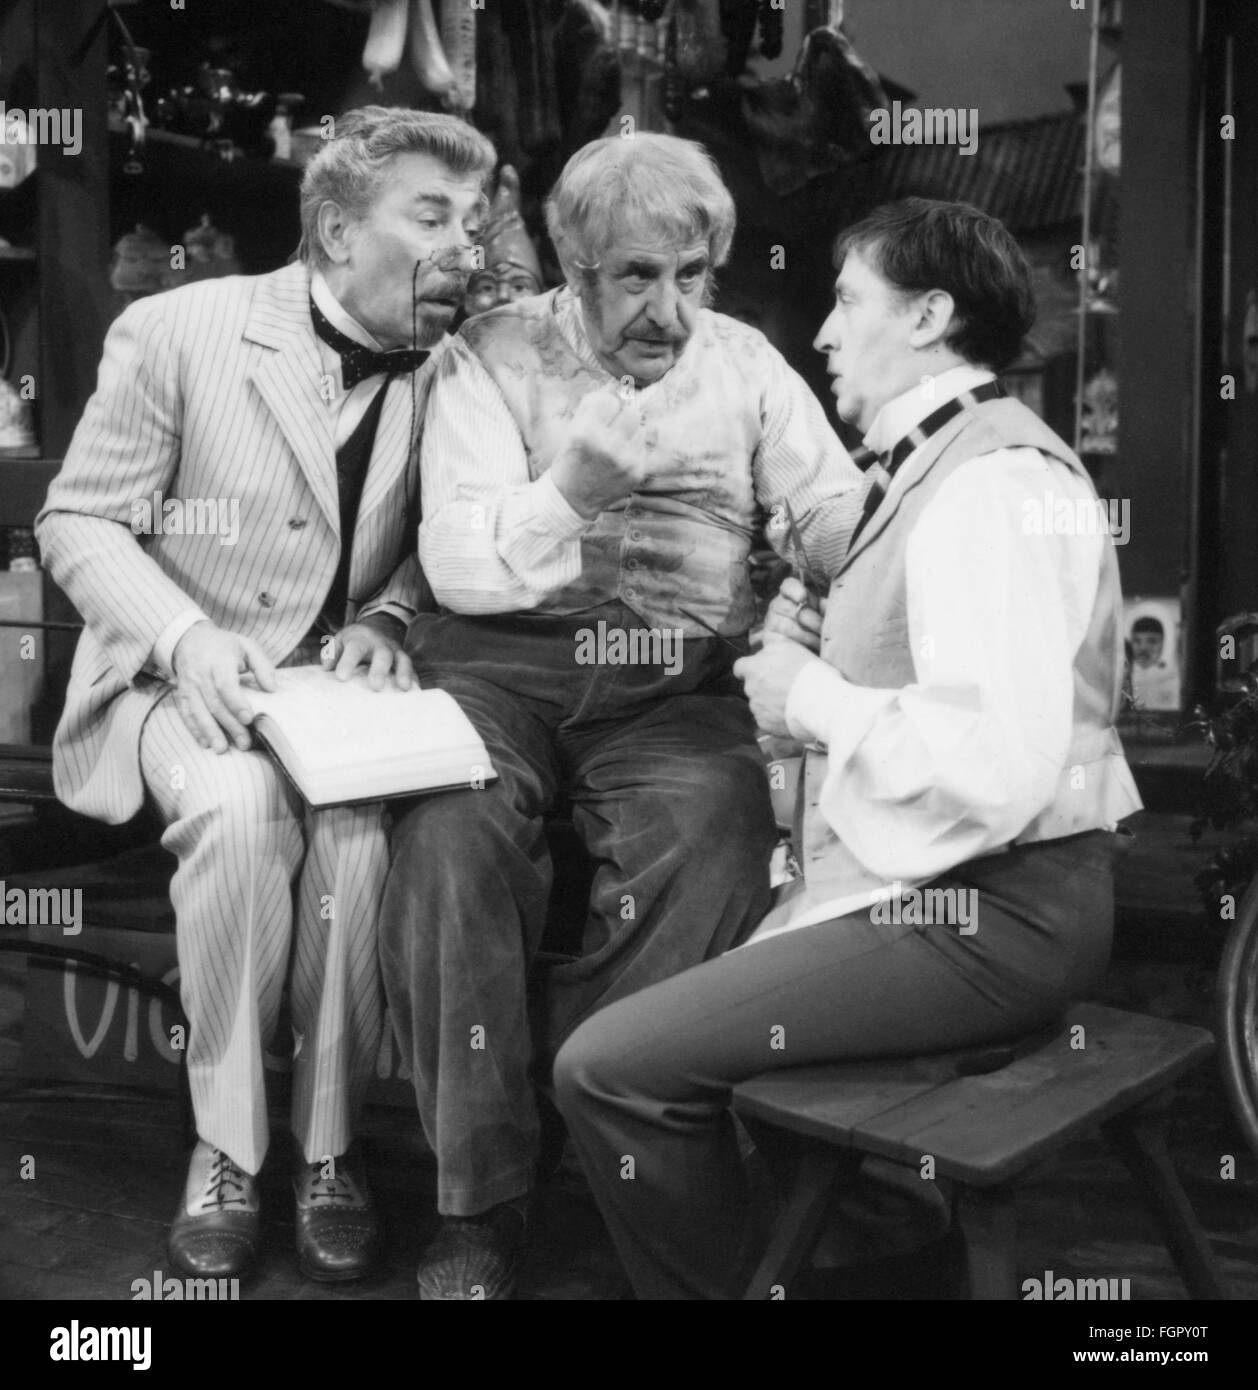 theatre, comedies and comedians - Germany, 'Honorary Citizen' (Ehrenbürger), scene with: Alexander Allerson, Willy Millowitsch, Eddi Arent, Millowitsch Theater, Cologne, ARD telerecording, 15.5.1982, Additional-Rights-Clearences-Not Available Stock Photo